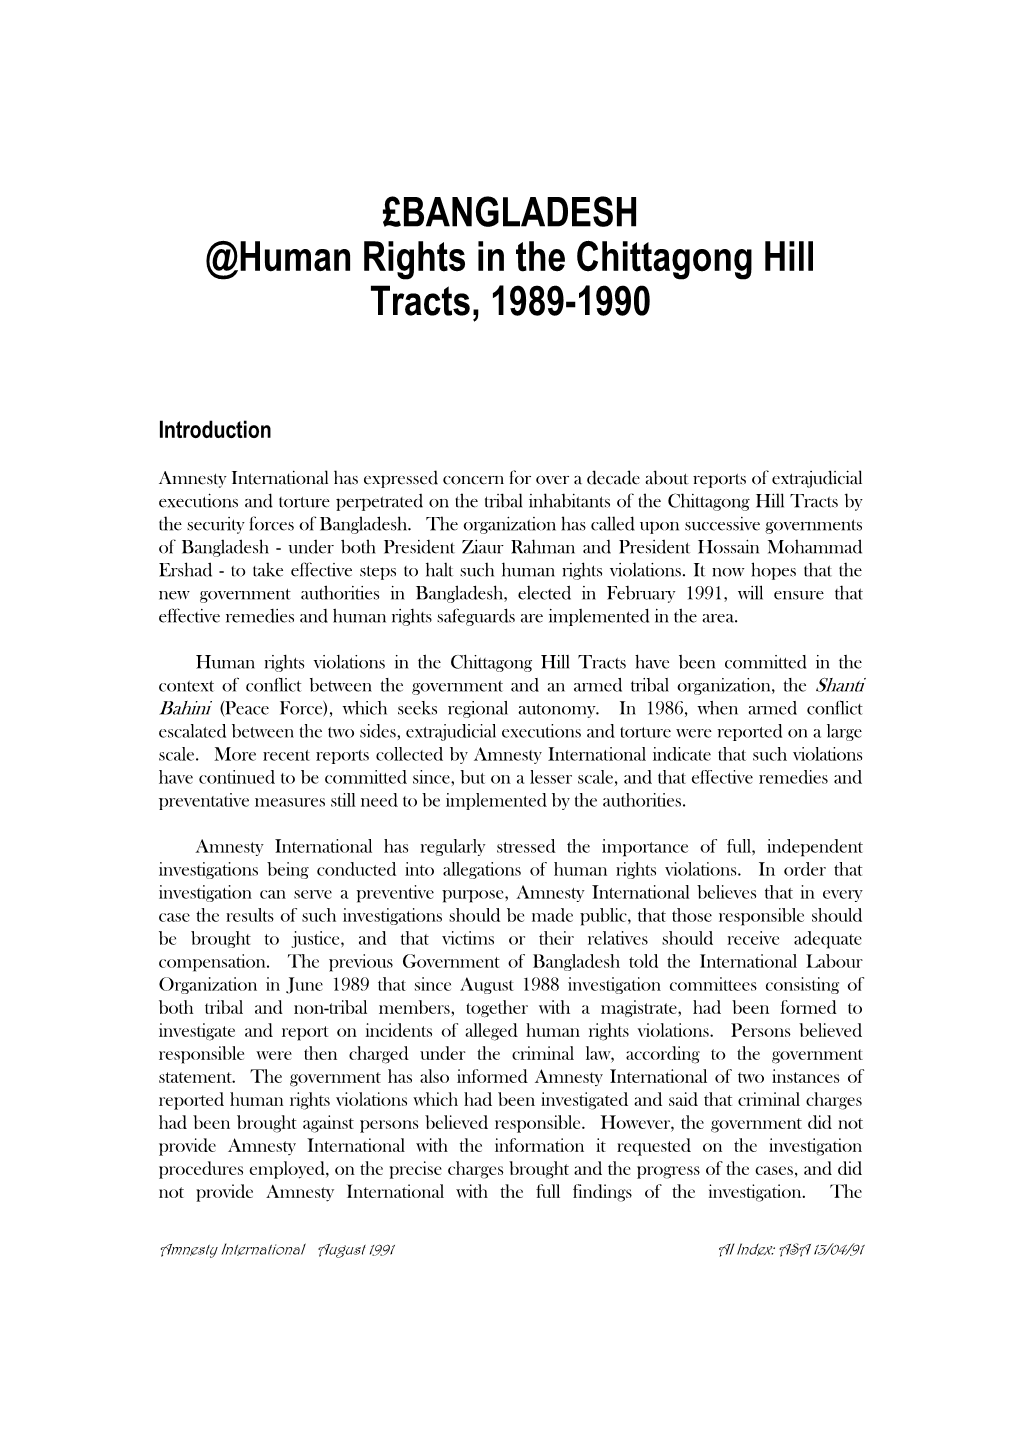 BANGLADESH @Human Rights in the Chittagong Hill Tracts, 1989-1990